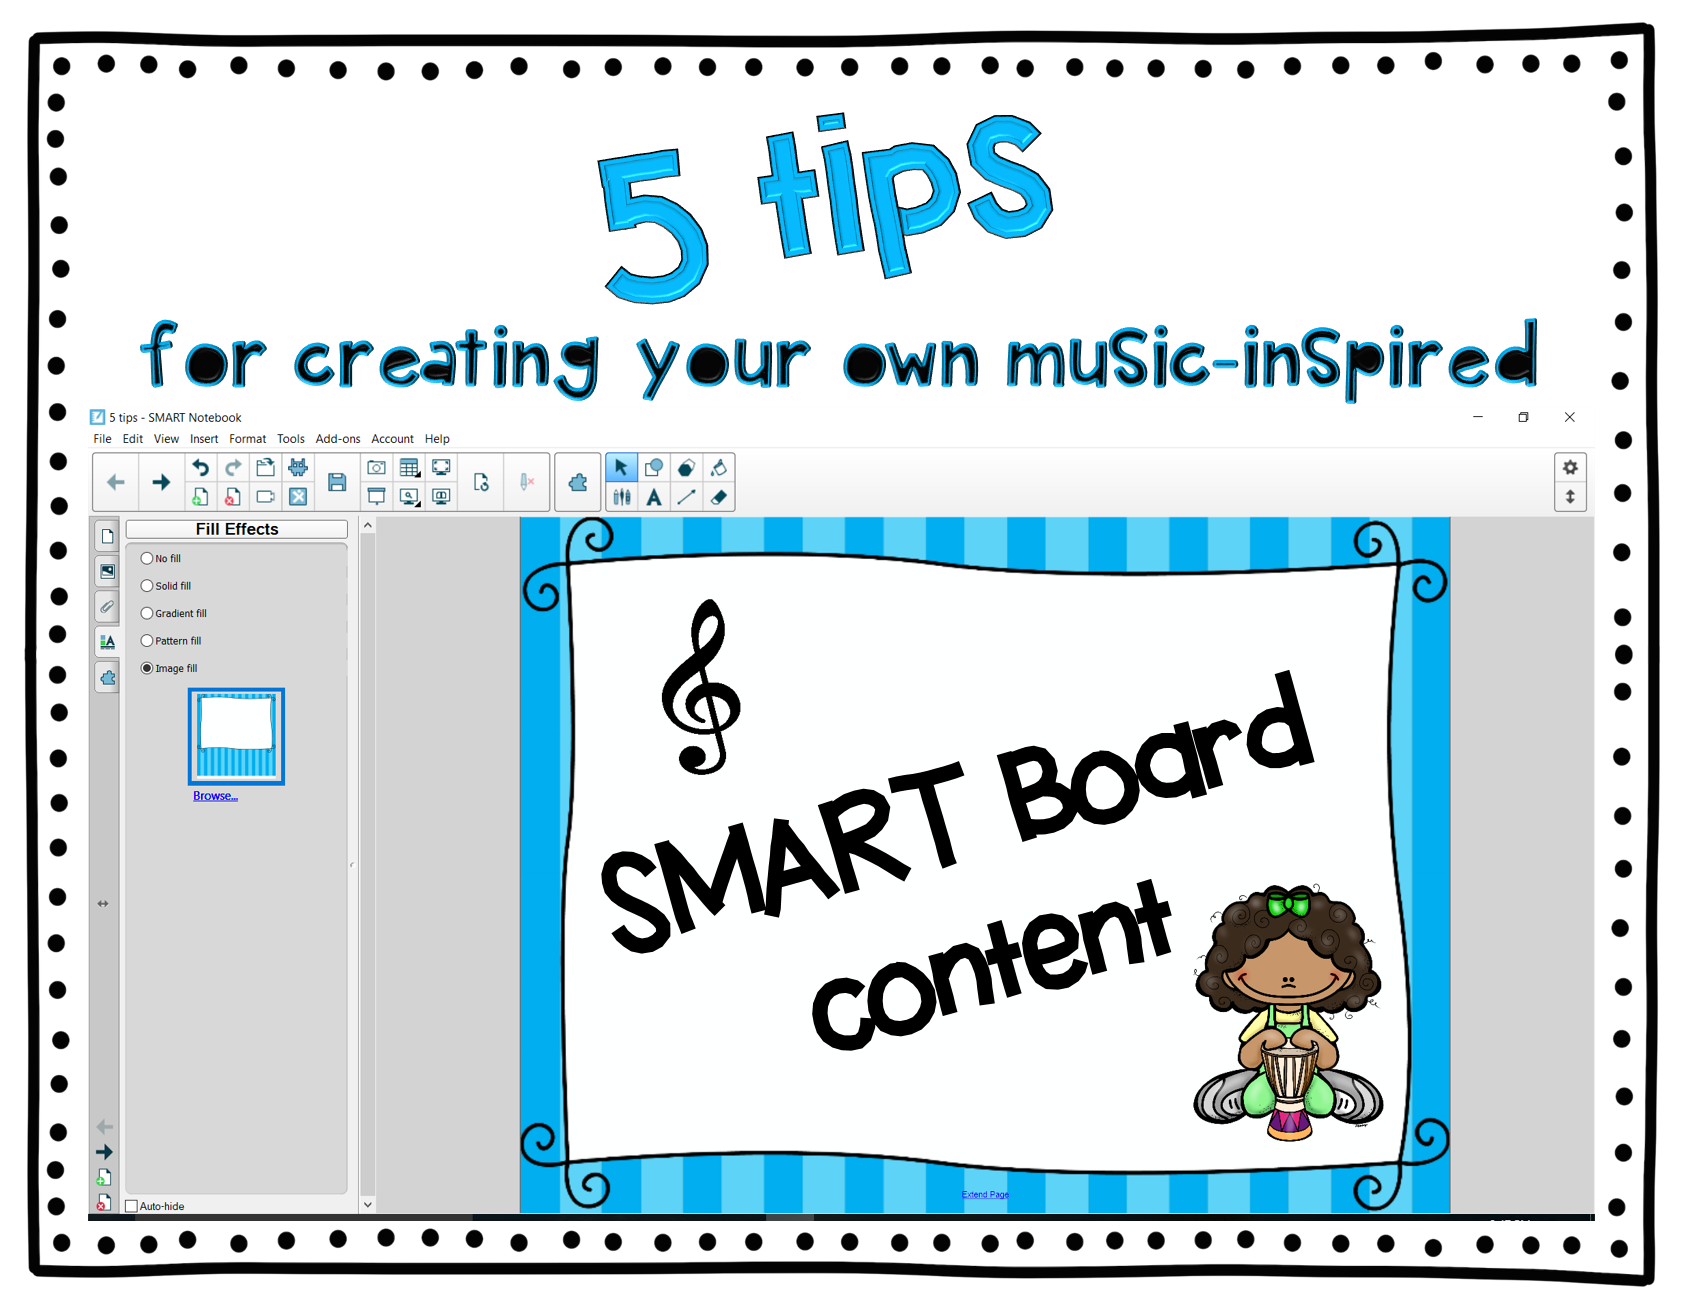 5 tips for creating your own music-inspired SMART Board content